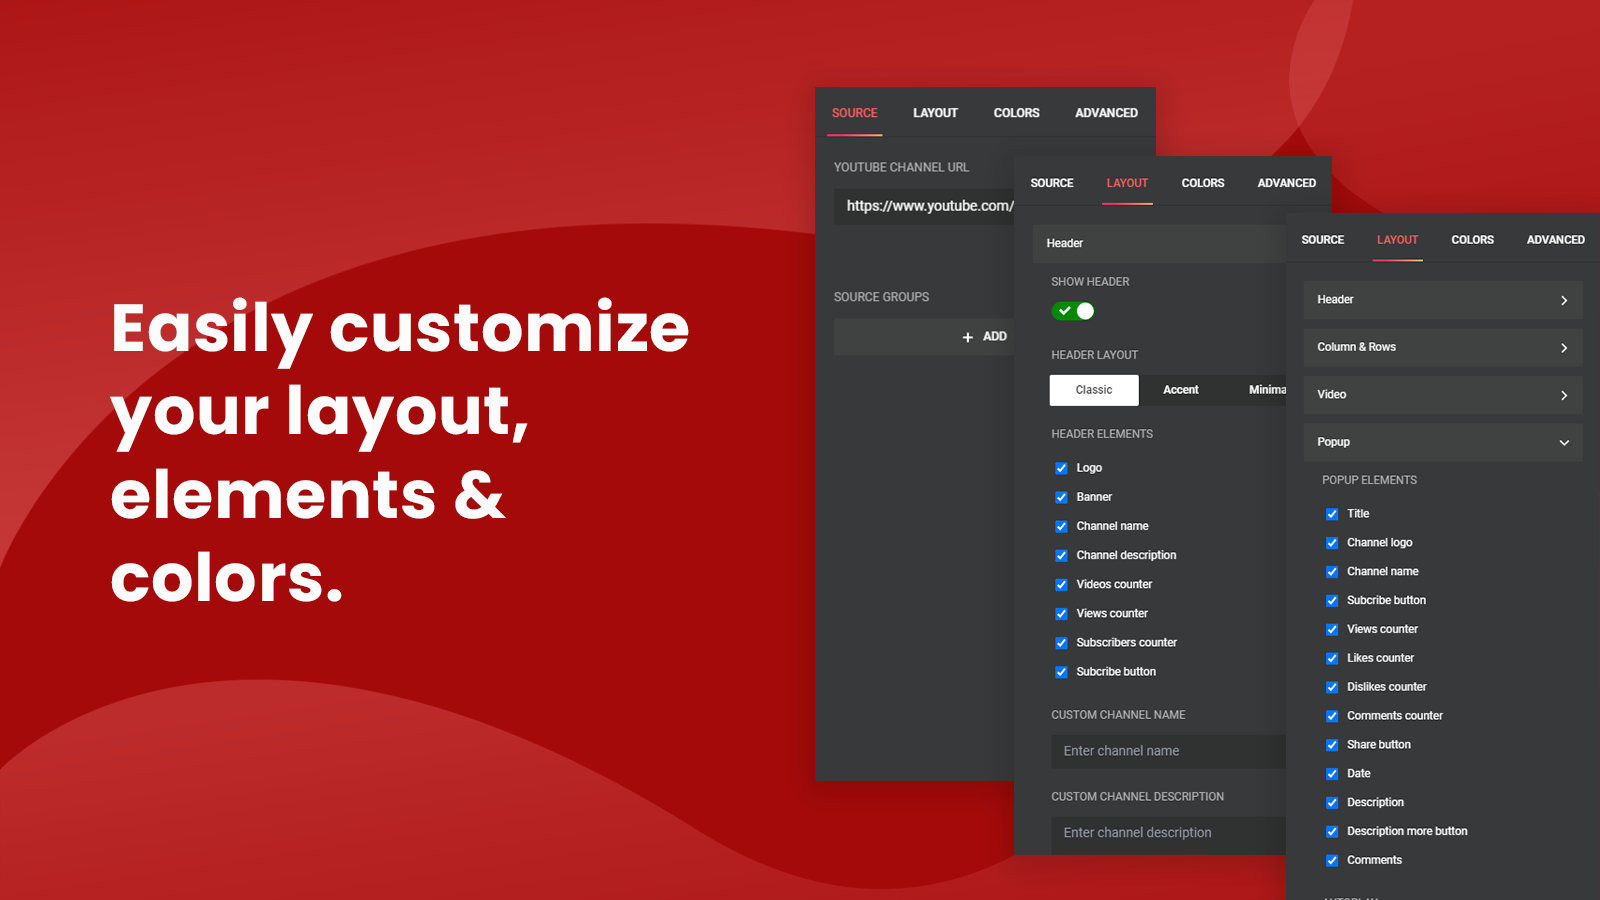 Easy customize your layout, elements, colors